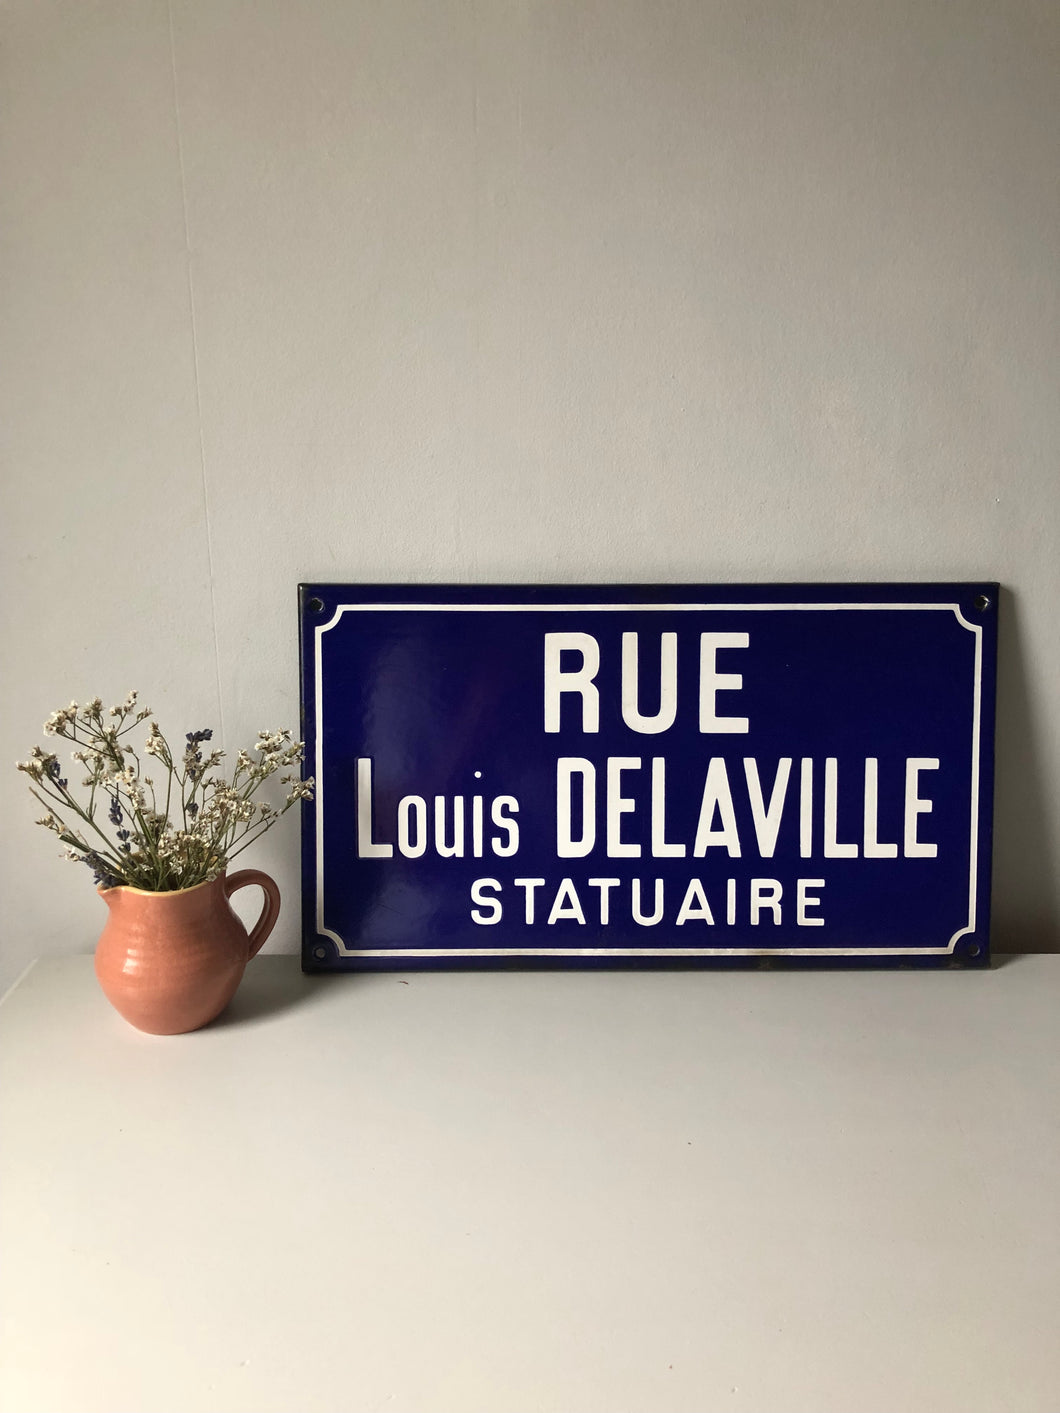 French Enamel Road sign